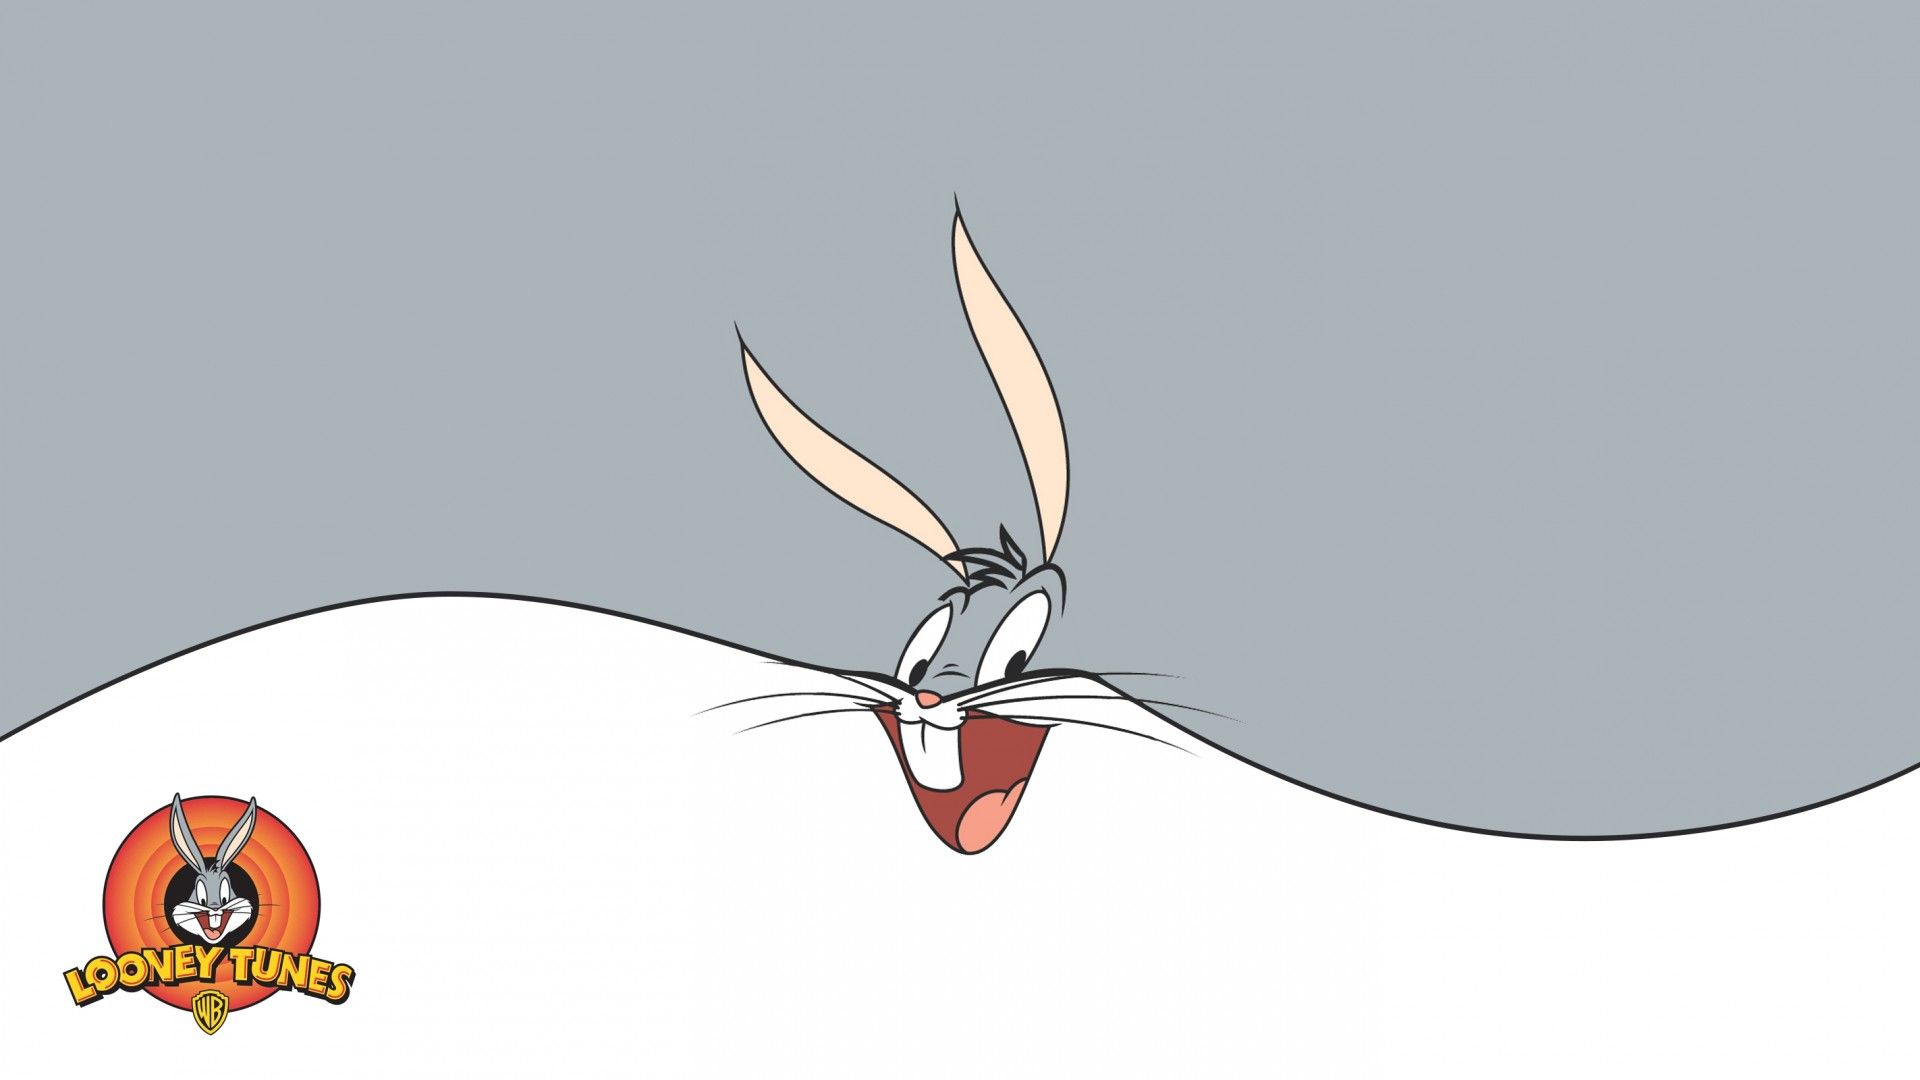 A cartoon character with bunny ears and an open mouth - Bugs Bunny